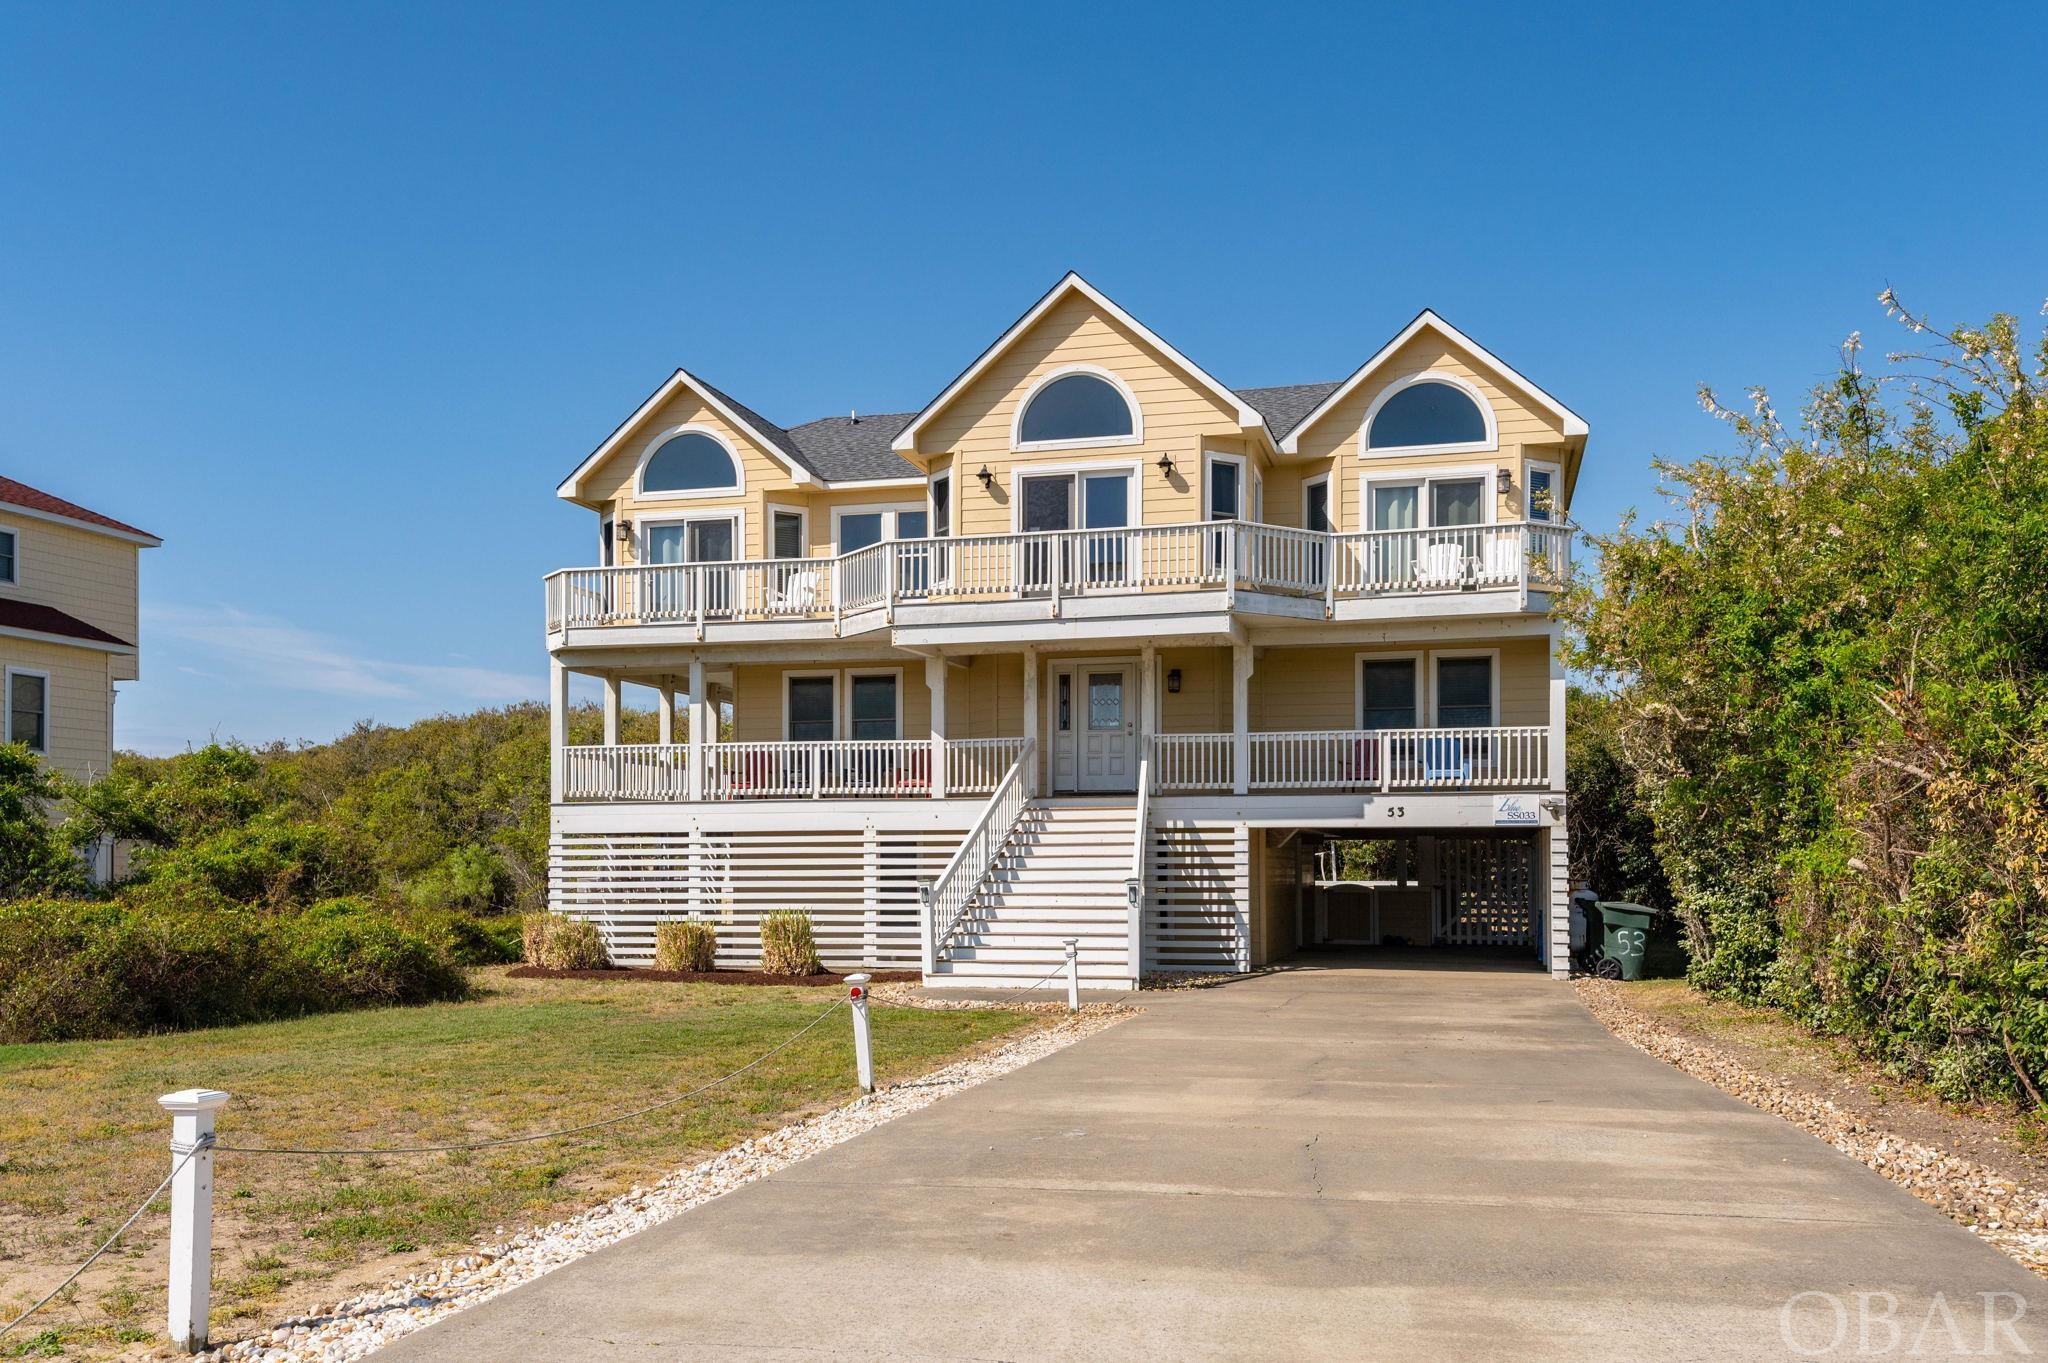 $125,491 in advertised rents in 2022 for this beautiful, quality built, 6 bedroom, 5 full bath & 2 half bath home that offers the opportunity to enjoy the uncrowded beaches of Southern Shores (access right across the street) and easy drive to Outer Banks attractions both north and south.  Enjoy the sunrises from the large east deck(replaced in 2020) and the pool, volleyball court and nature area from the back deck(replaced in 2020). Stunning ocean views are yours from all of the great room windows, the two master suites, and the ocean side deck! This awesome home offers the popular reverse floorplan design, with a huge living/family room area with hardwood floors, gas fireplace, elevated dining area with seating for all, and thoughtful open kitchen area. The fully equipped kitchen has lots of room for the family gatherings as well as multi use seating at the breakfast counter. There is a half bath on the top floor as well as two large “en suite” bedrooms, each with beautiful ocean views and large tiled bathroom areas. Moving to the middle floor, you are welcomed by a large second living area finished with hardwood flooring and ceramic tile.  This level also contains 3 nicely proportioned bedrooms, two of which share a full bath. The en suite bedroom is very large supporting a king bed and a lovely tiled bath with shower and separate tub. This unique bath also has an additional lockable doorway, through which is another commode and shower. This “secret” half bath door opens up next to the hot tub located on the middle west facing deck, a very convenient feature!  Down to the ground level, this family friendly house is ready for fun and entertainment offering a full game room with pool table, television,custom table and chairs, recessed lighting, and the all essential wet bar with second refrigerator. The downstairs bedroom sleeps 4 easily with a 3-person bunk bed and separate single bed with adjoining bathroom. There is a large (6’ x 5’) laundry area housing the washer and dryer. It’s all about outdoor life in the OBX and this house has it all. Enjoy the large aquatic area featuring 11 x 28 in-ground pool surrounded by concrete sun-decking and privacy fence. In addition, there are two outside showers and a volleyball area. One of the special features of this property is that it backs up to the Chicahauk common area full of trees so you won’t have a neighbor peering into your back yard. Bryant HVAC units power the 3-zoned heating and cooling system for efficient energy consumption. There are numerous other features,, but you’ll need to see them to appreciate. Beach access is just across the street!  Great location, on the southern end of Ocean Boulevard, reduces time in traffic on check-in day and it provides easy access to attractions north and south.  Don't miss out, schedule your showing today! Seller has a transferrable home warranty through Home Warranty Inc. Home Protection Plan.   2023 Calender already $92,317 in owner rent. Based on 2022 reservations and 2023 rates $126,000+ is estimated owner gross for '23, by owner.